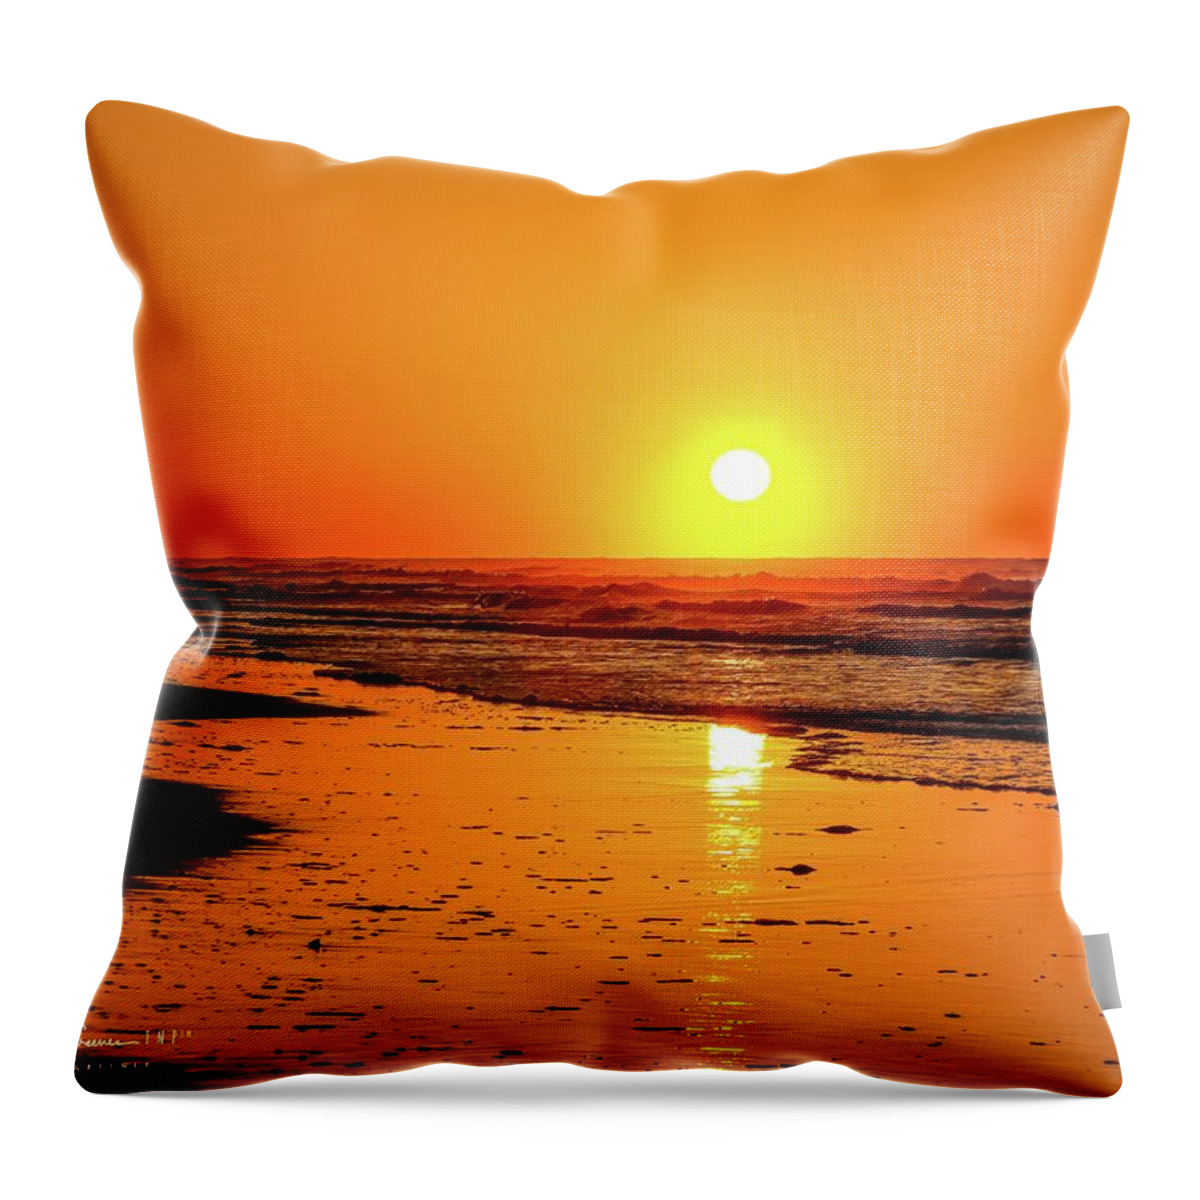 Surf City Throw Pillow featuring the photograph Red Sunrise Surf City by Shawn M Greener